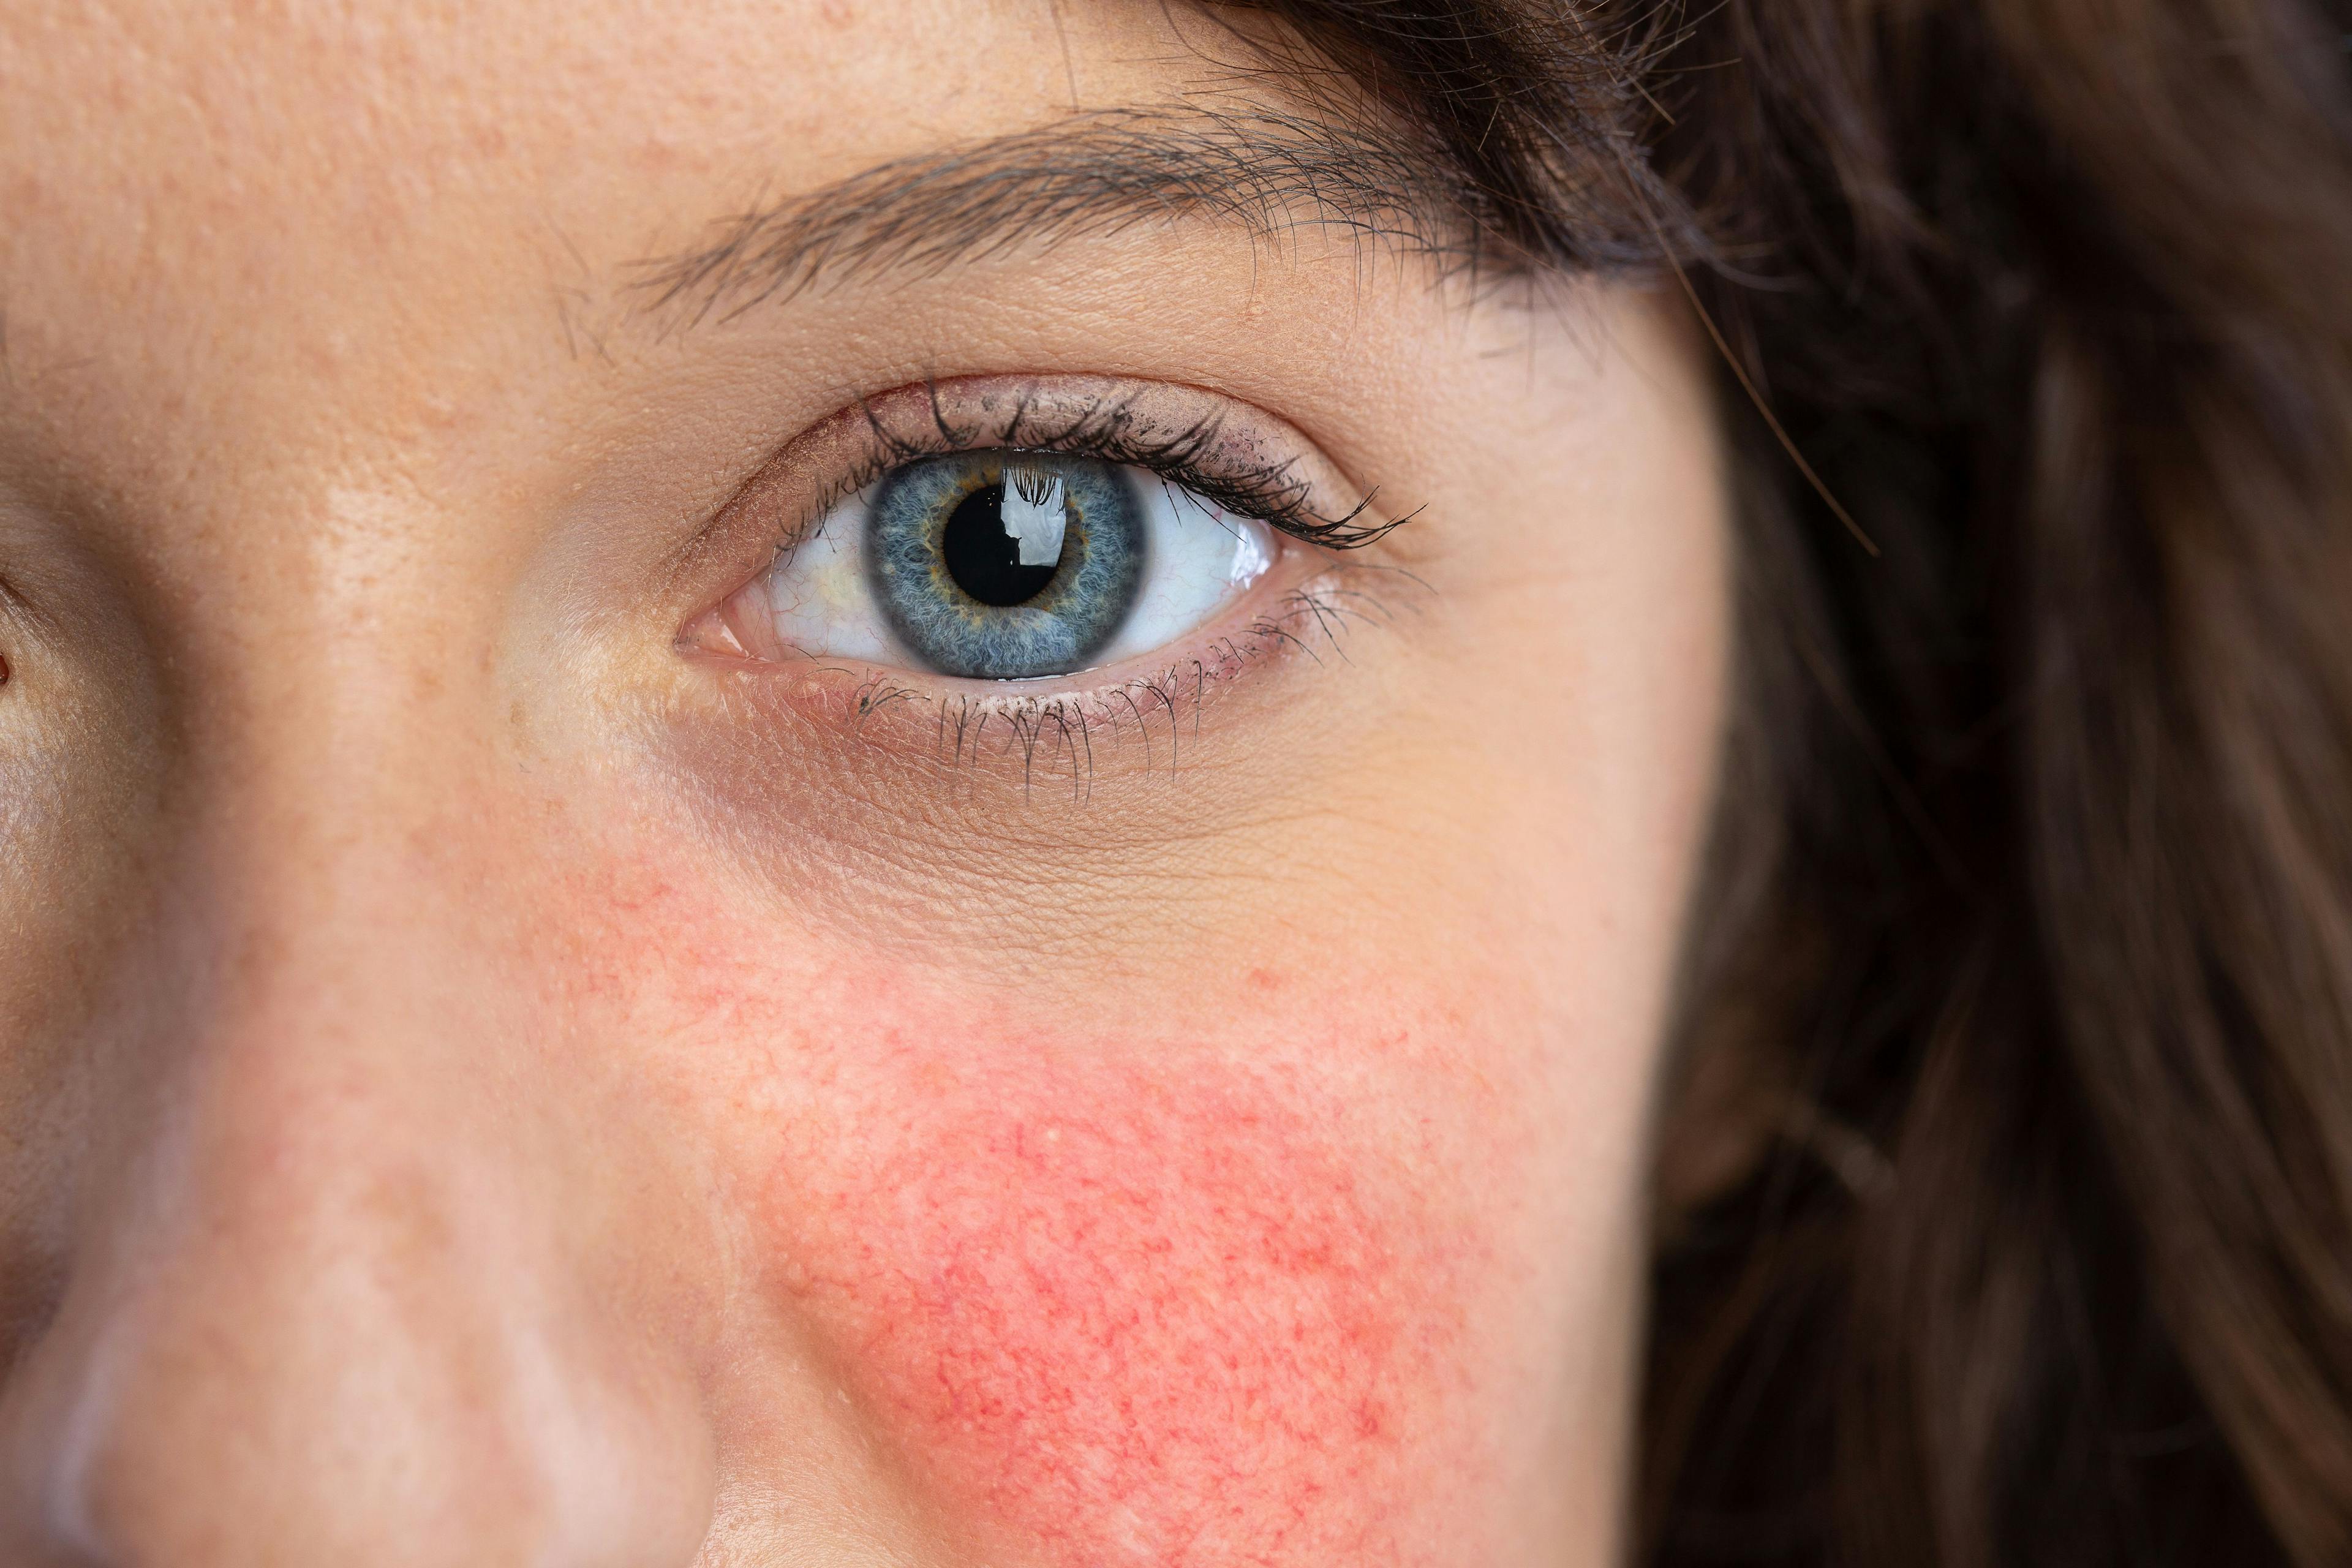 Combination Rosacea Therapy Improves Outcome 